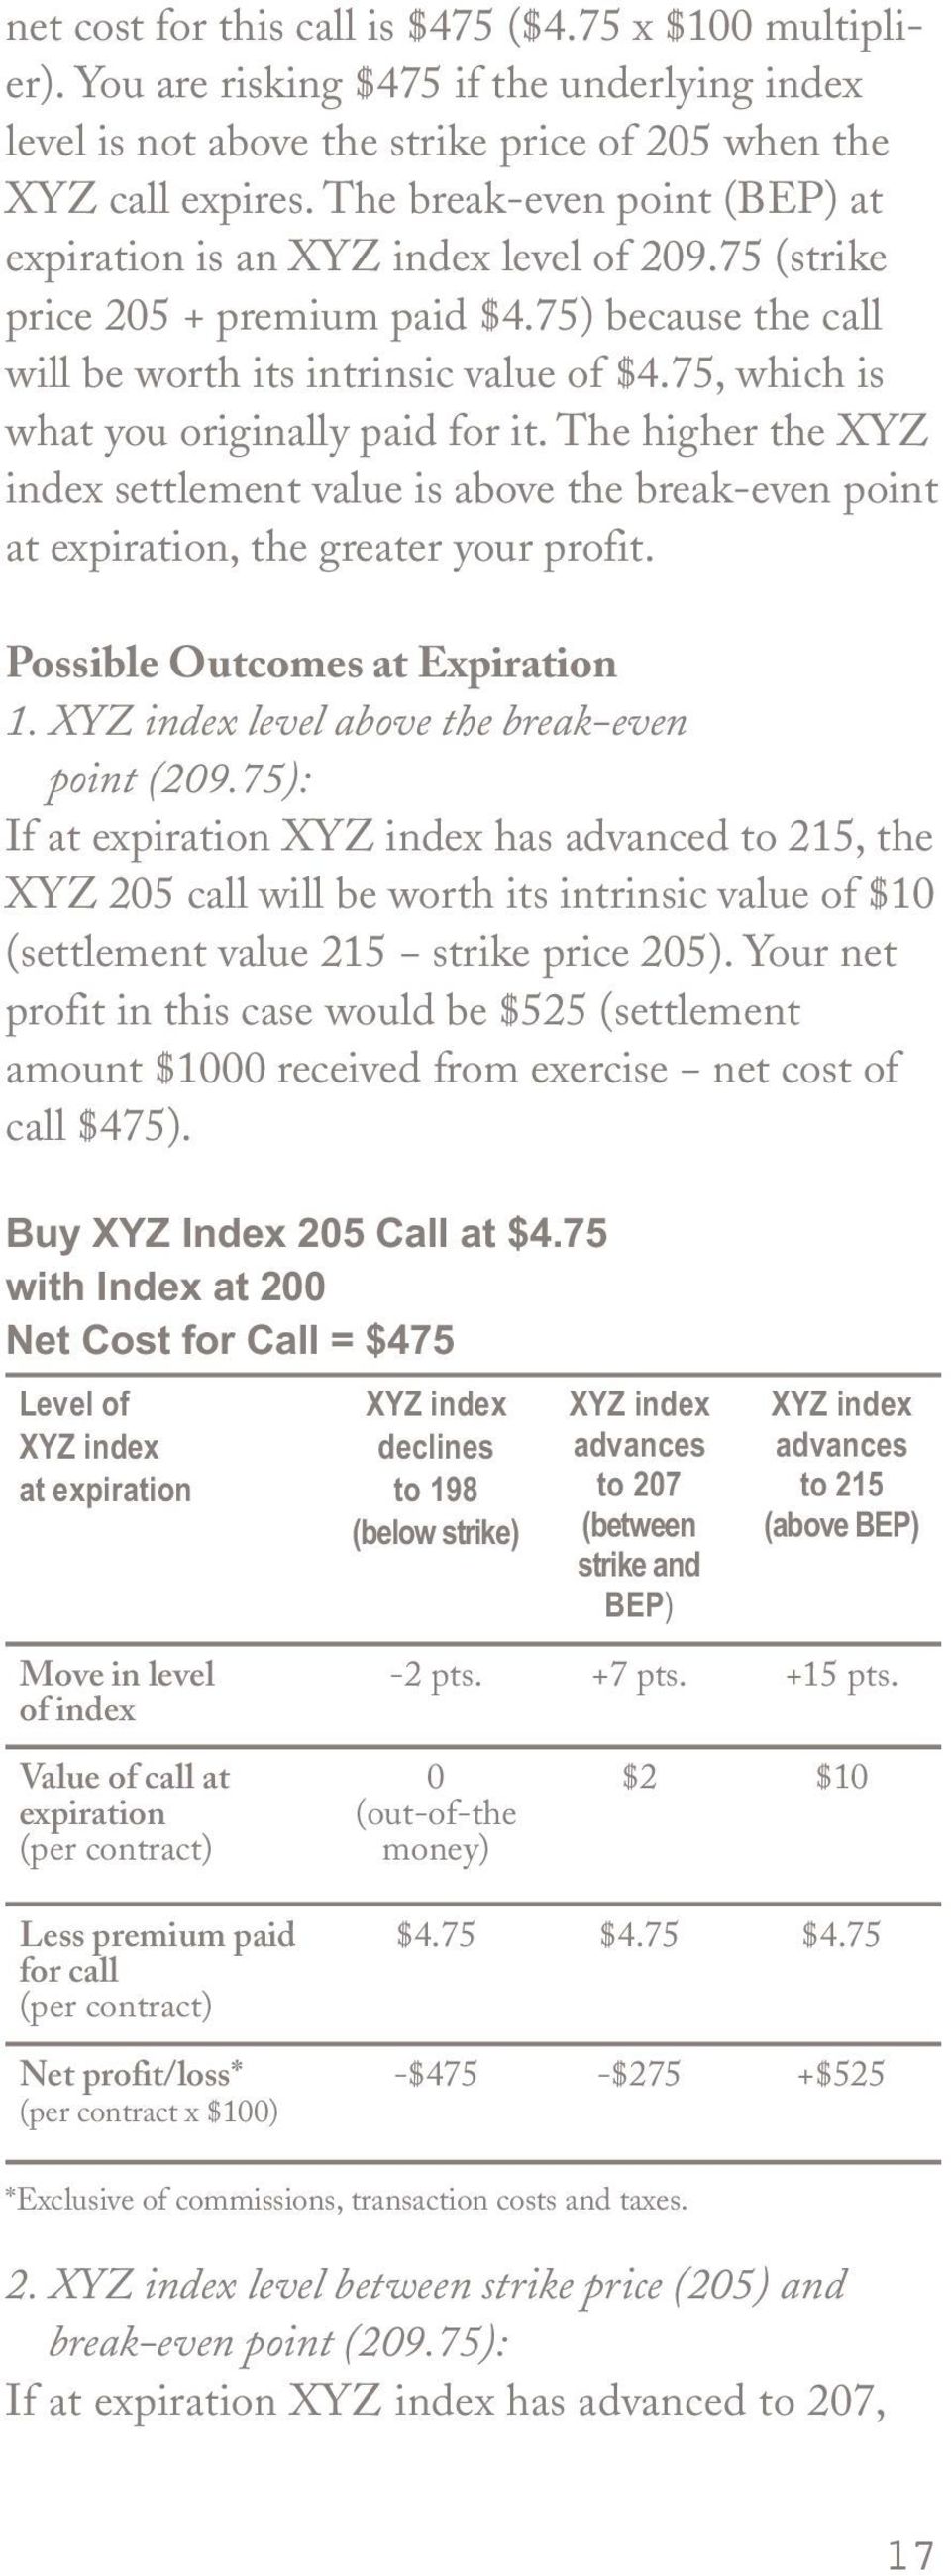 75, which is what you originally paid for it. The higher the XYZ index settlement value is above the break-even point at expiration, the greater your profit. Possible Outcomes at Expiration 1.